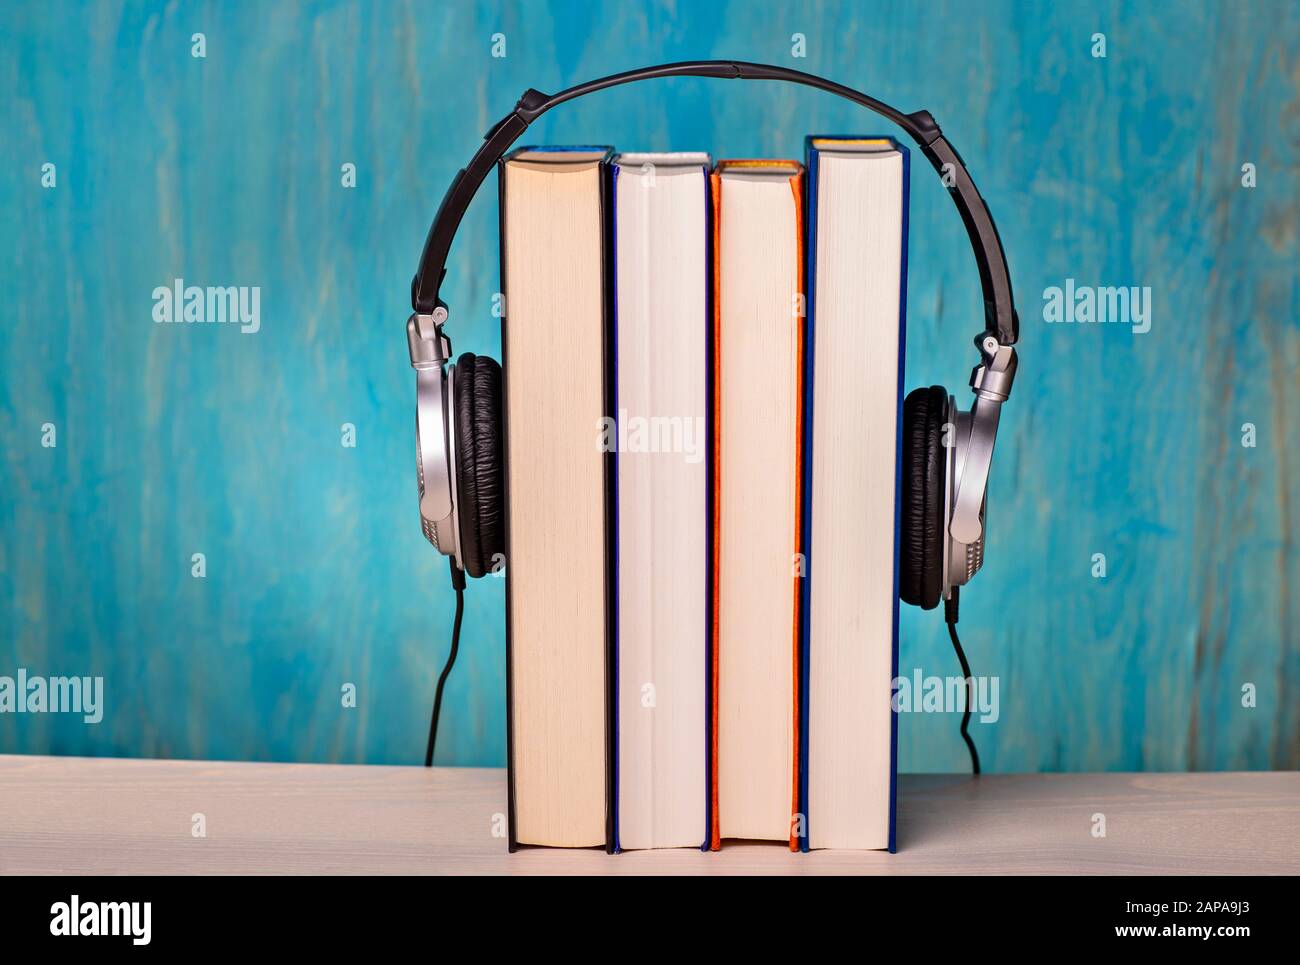 Headphones with four books as symbol for audio books Stock Photo